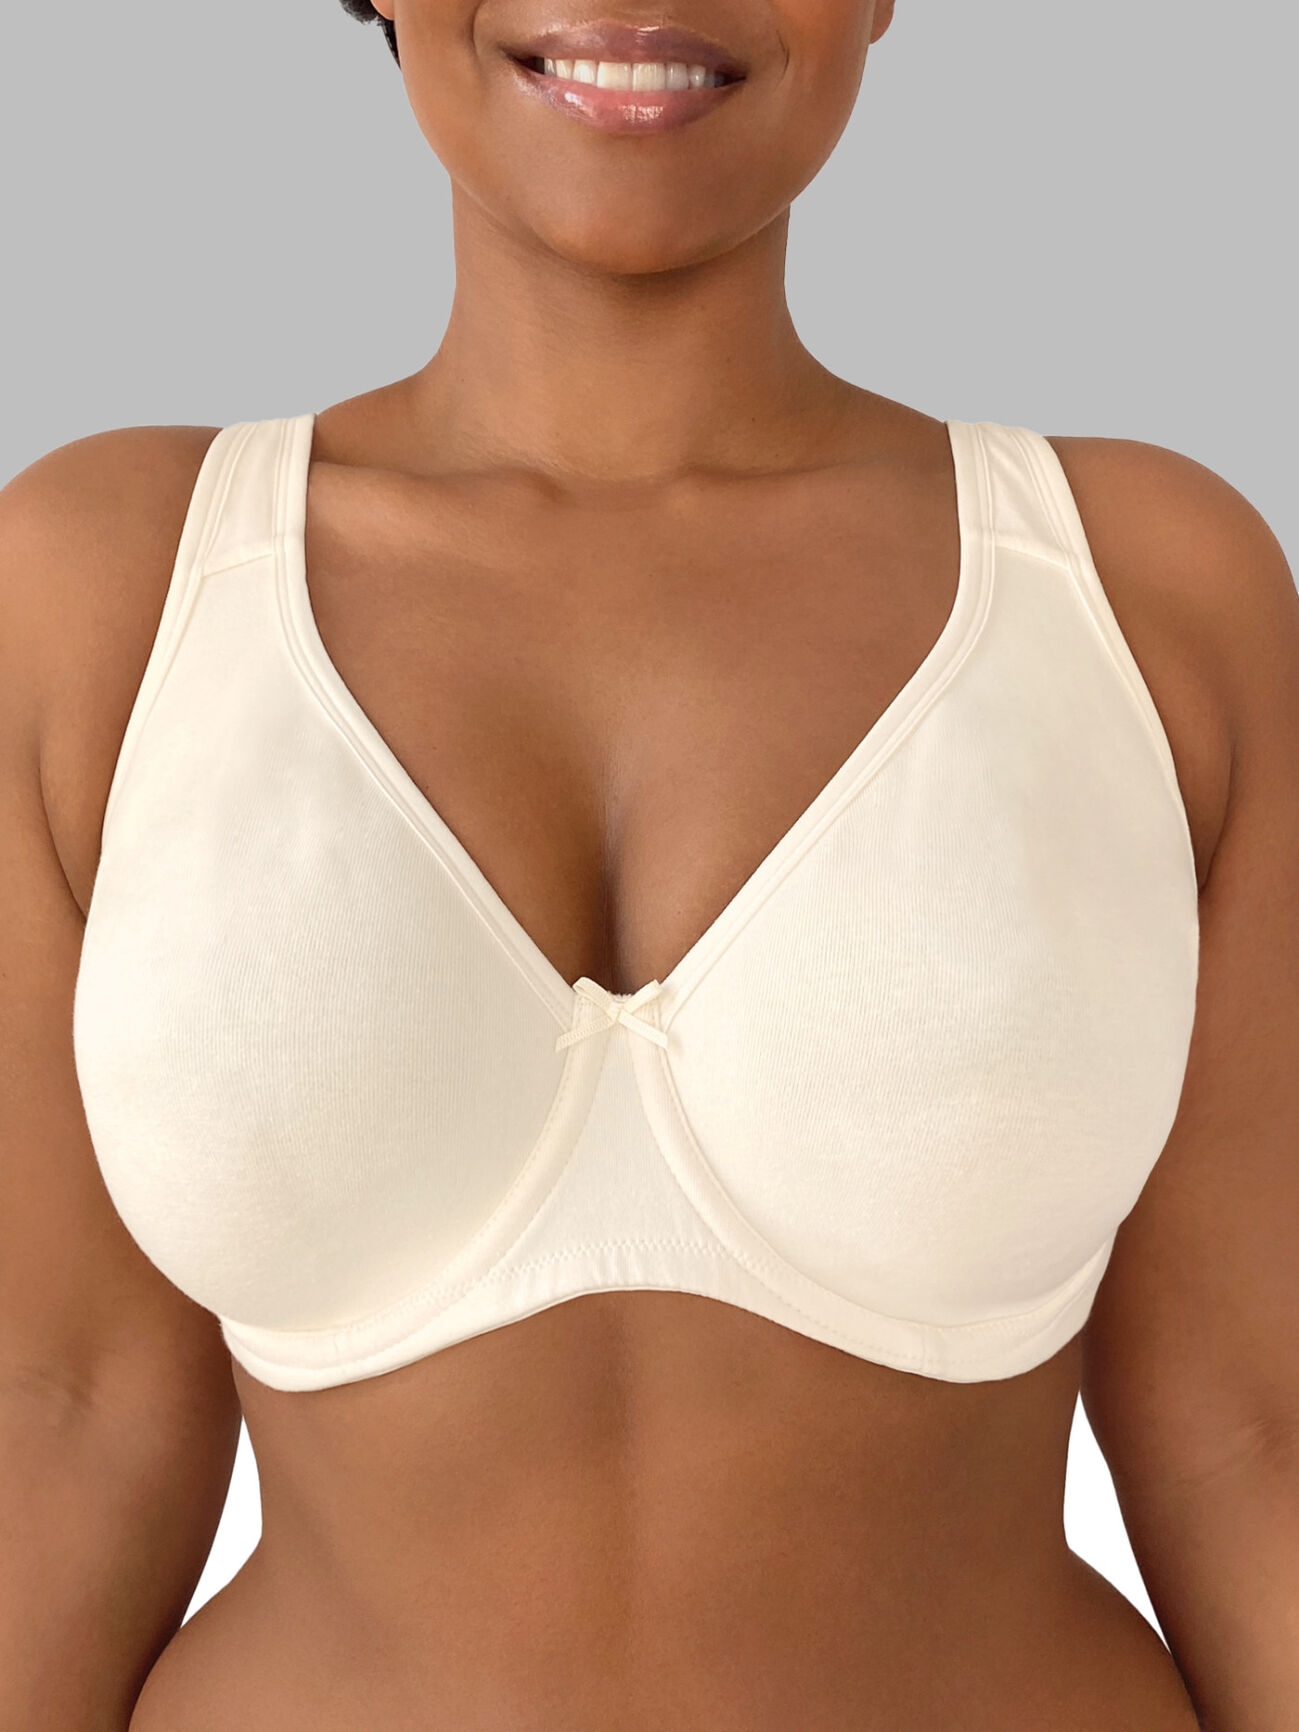 Unlined Bras 38D, Bras for Large Breasts